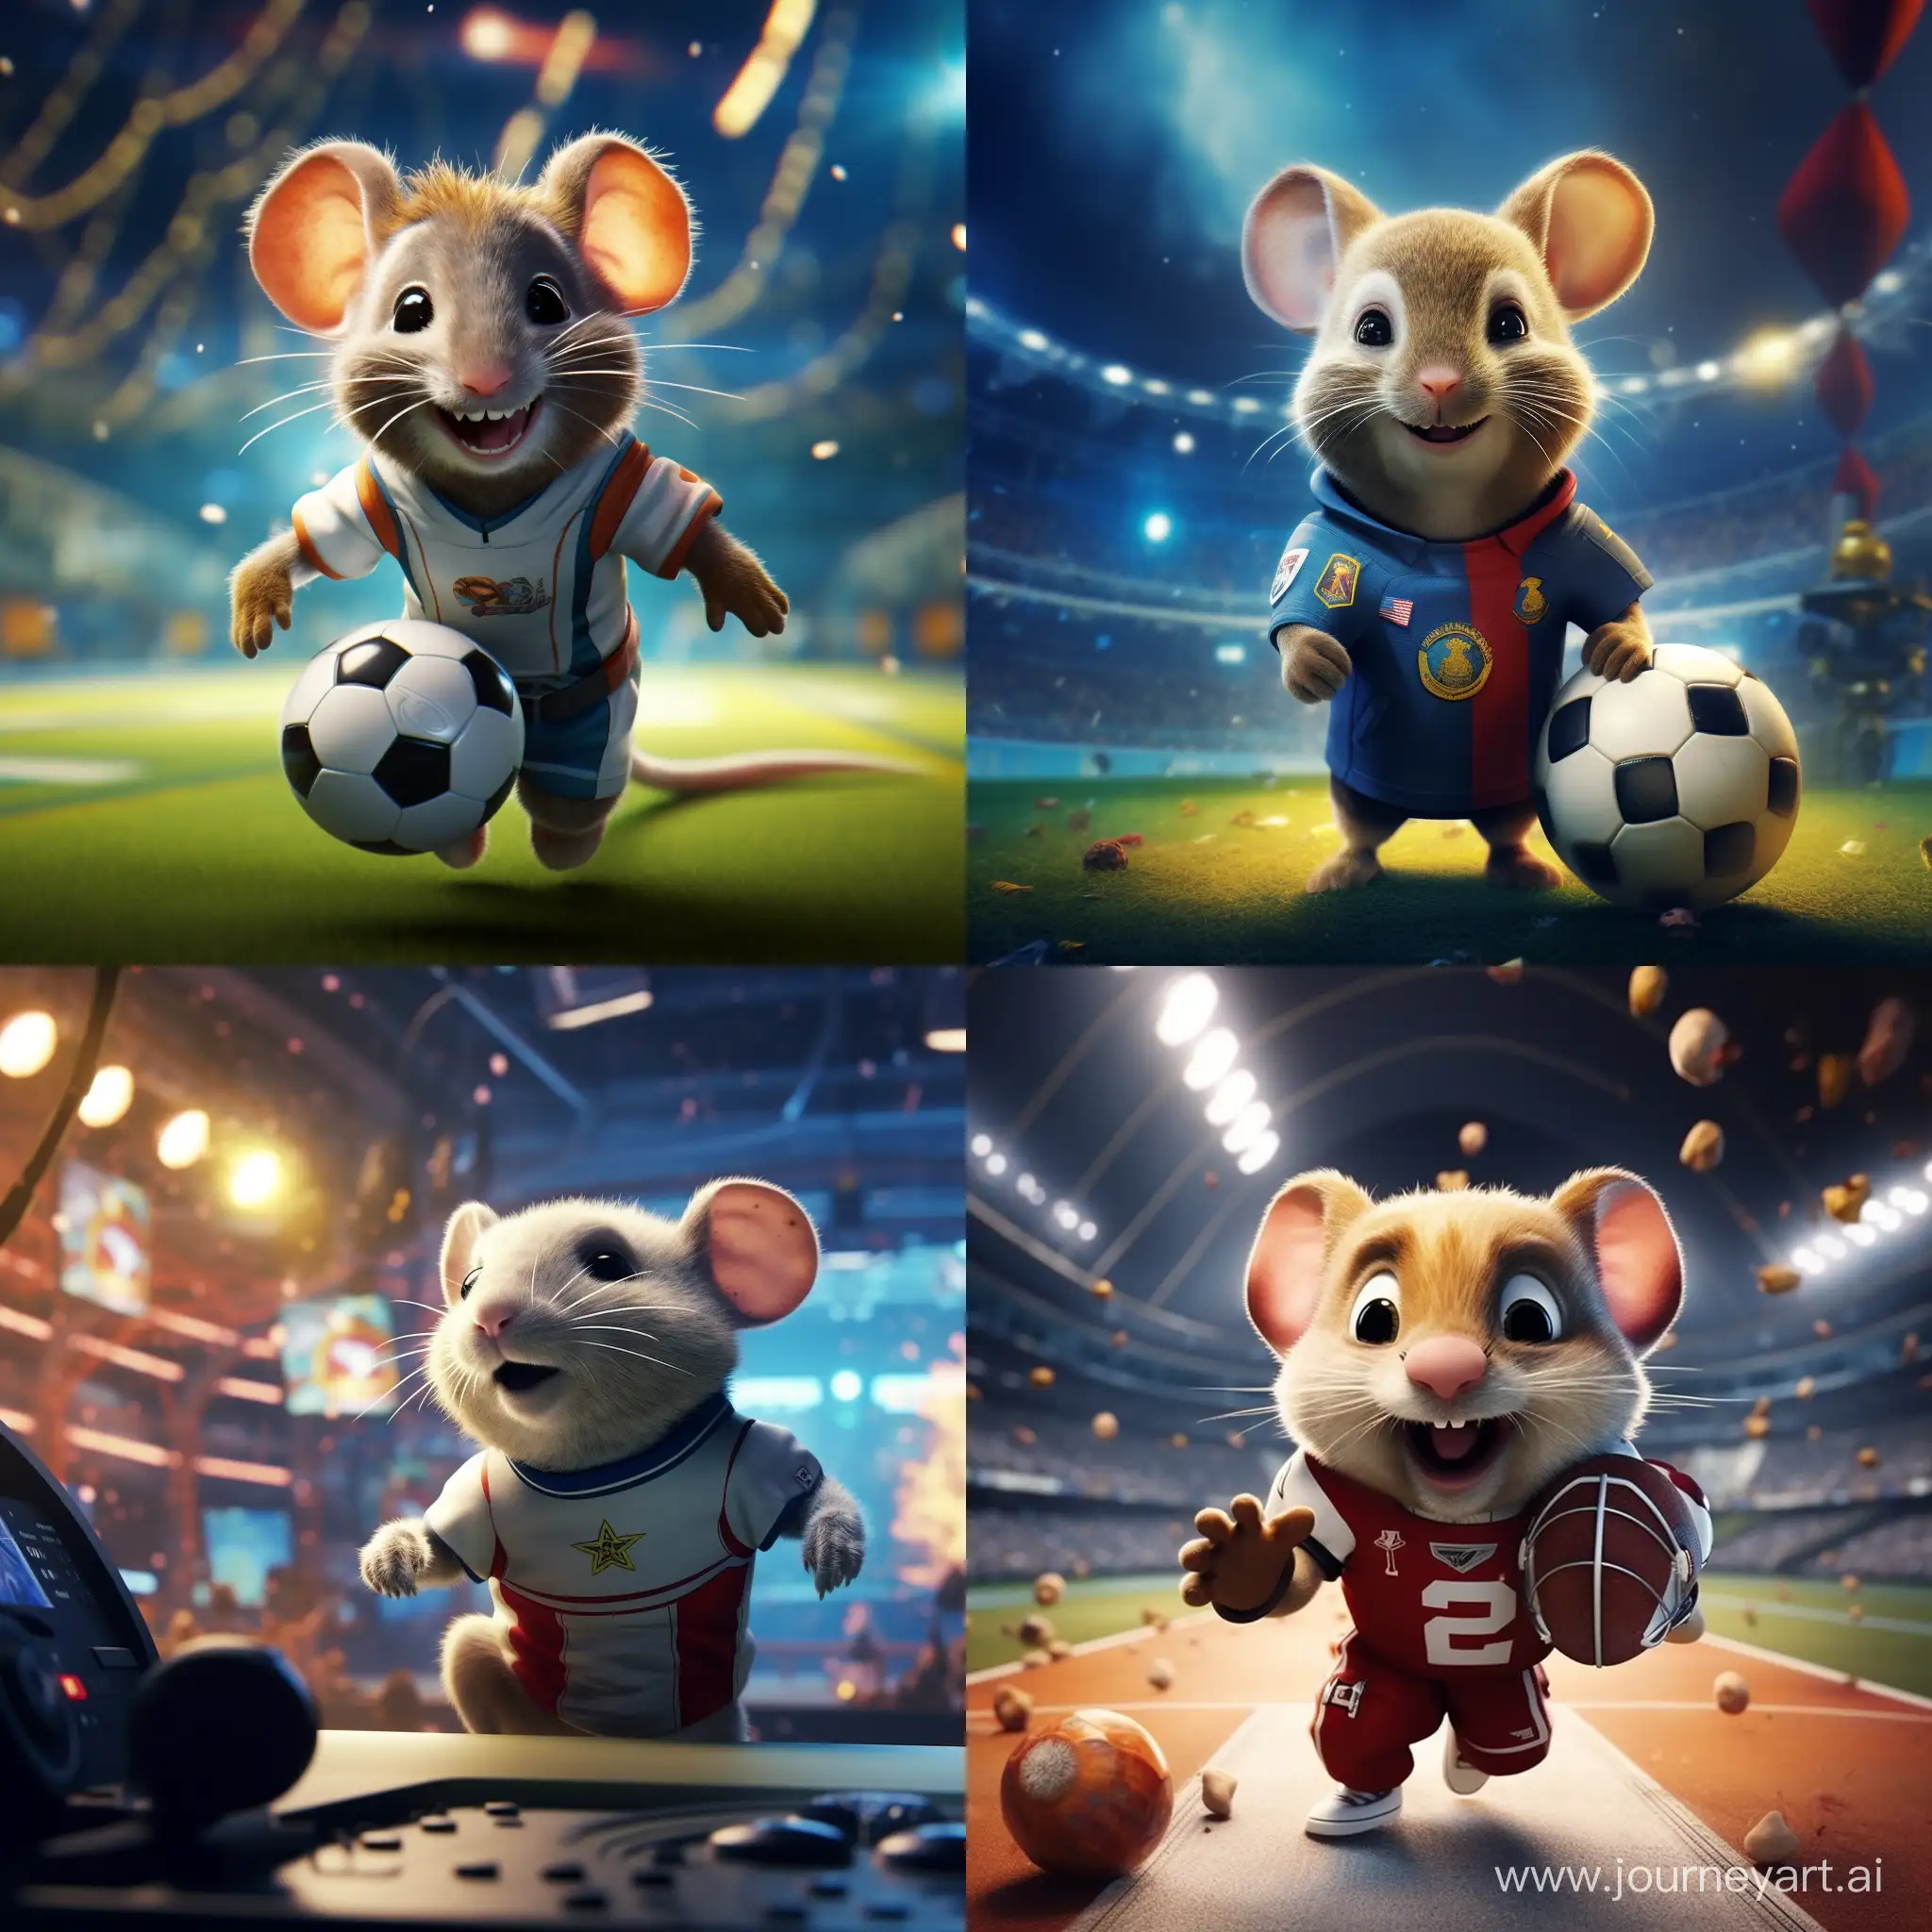 Adorable-Mouse-Soccer-Match-on-a-Futuristic-Spaceship